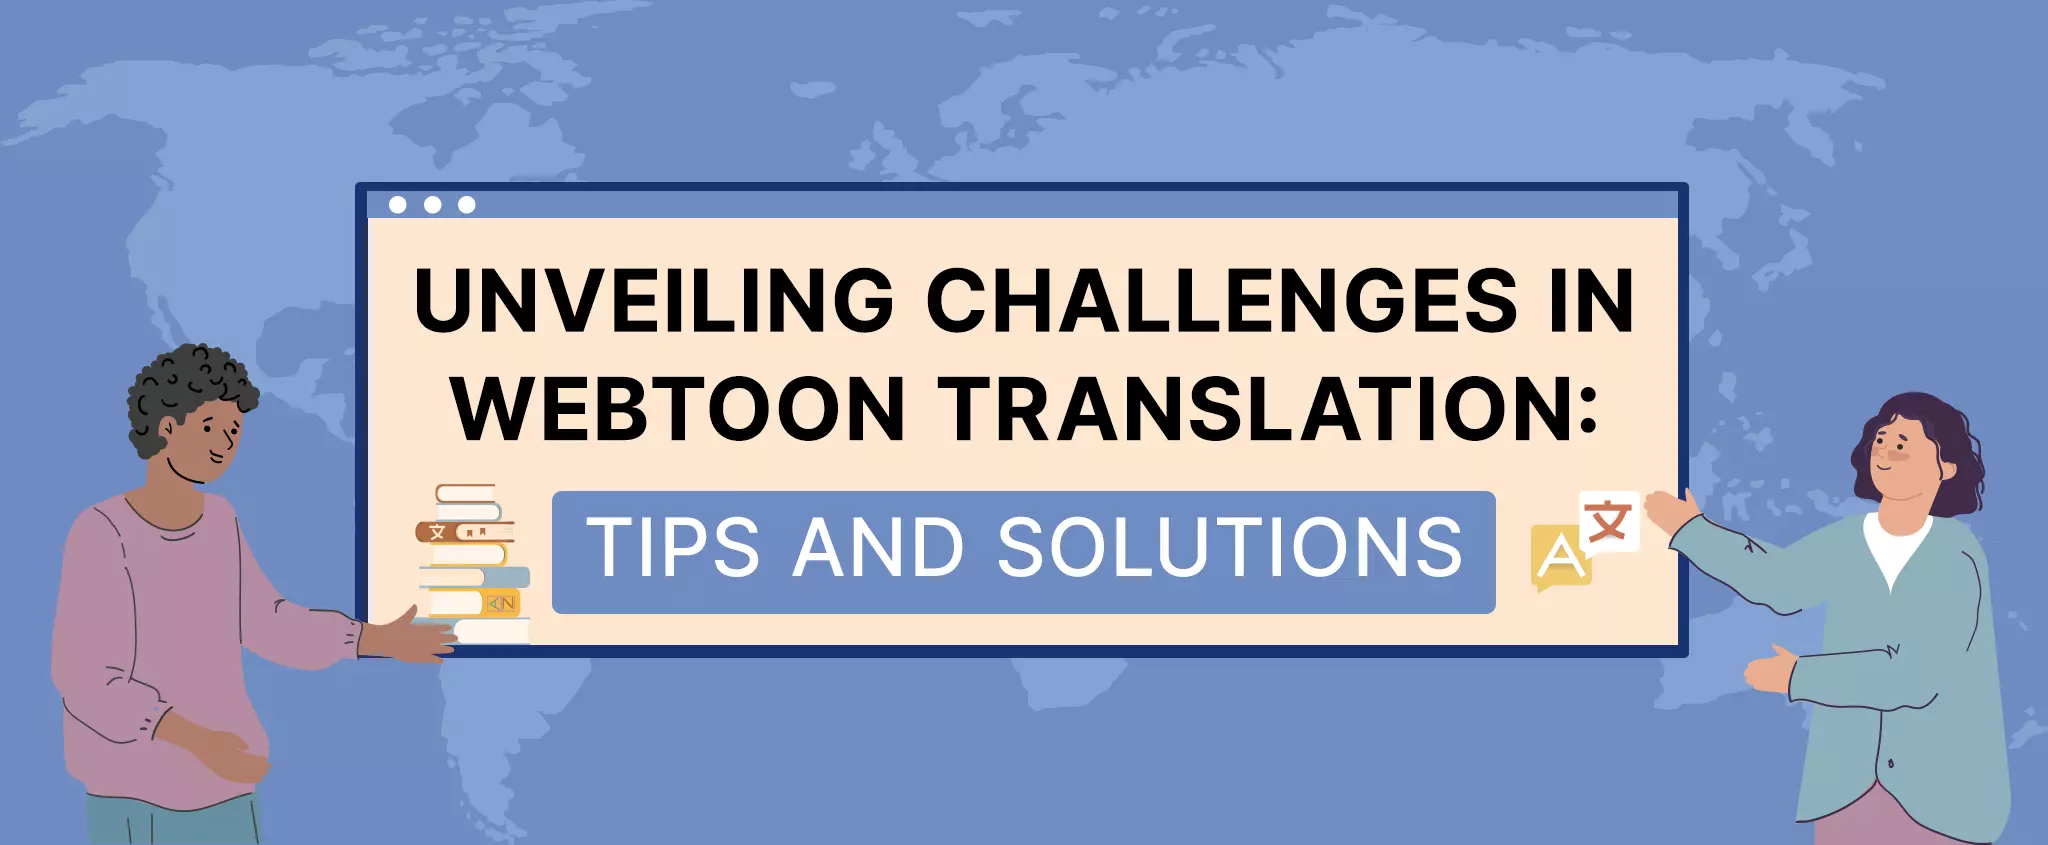 Unveiling Challenges in Webtoon Translation Tips and Solutions